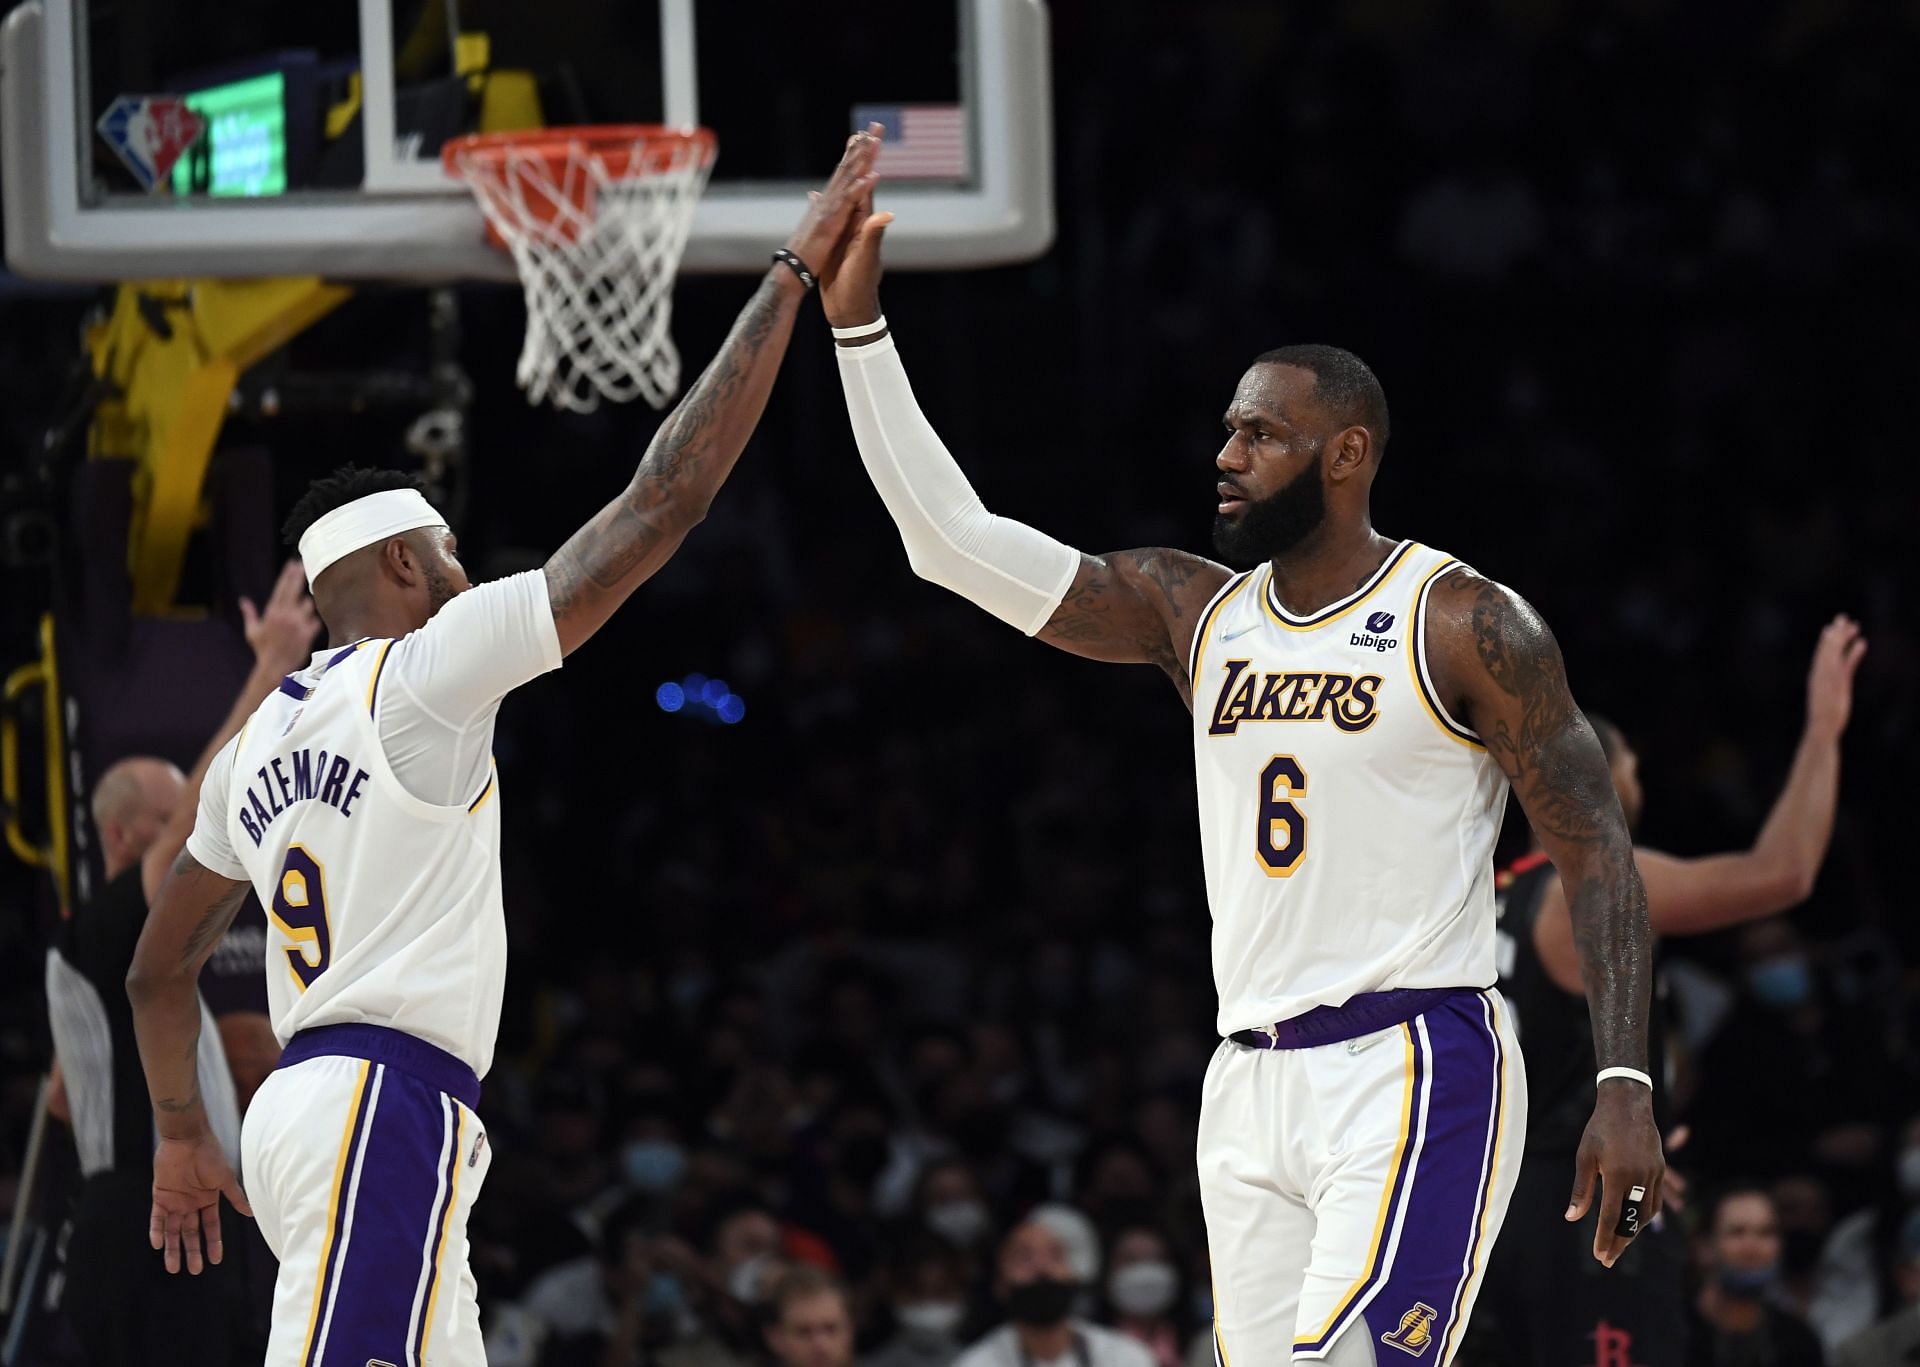 LeBron James #6 of the Los Angeles Lakers high fives Kent Bazemore #9 after scoring a basket against the Houston Rockets during the first half at Staples Center on October 31, 2021 in Los Angeles, California.